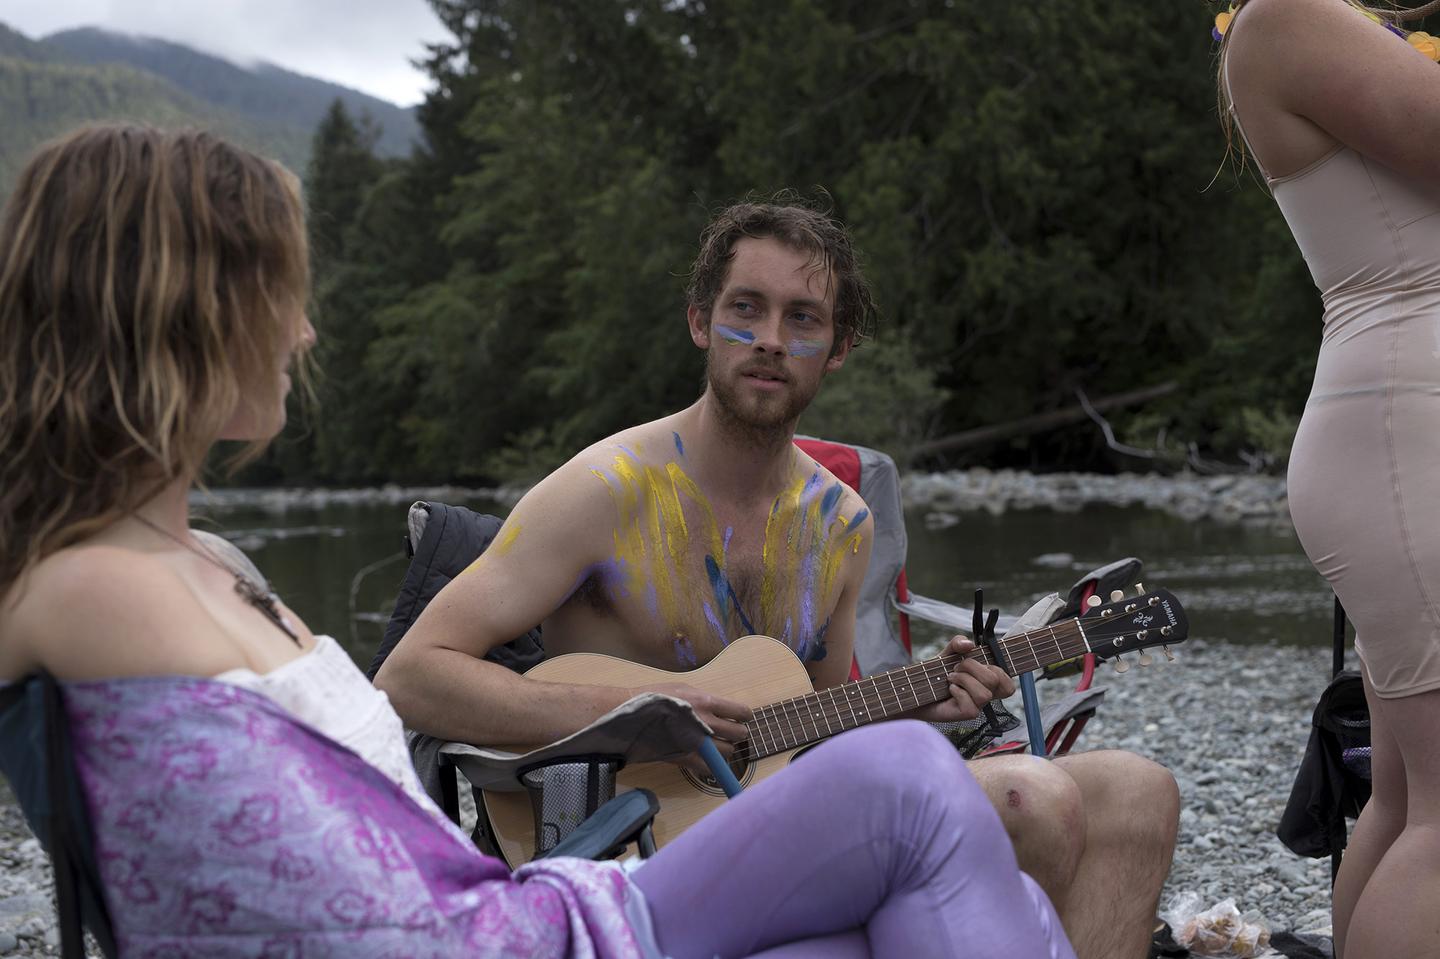 Ian O'Brien plays the guitar while camping along the Pacific Rim Highway on Vancouver Island, on July 04, 2020. Credit: Melissa Renwick.